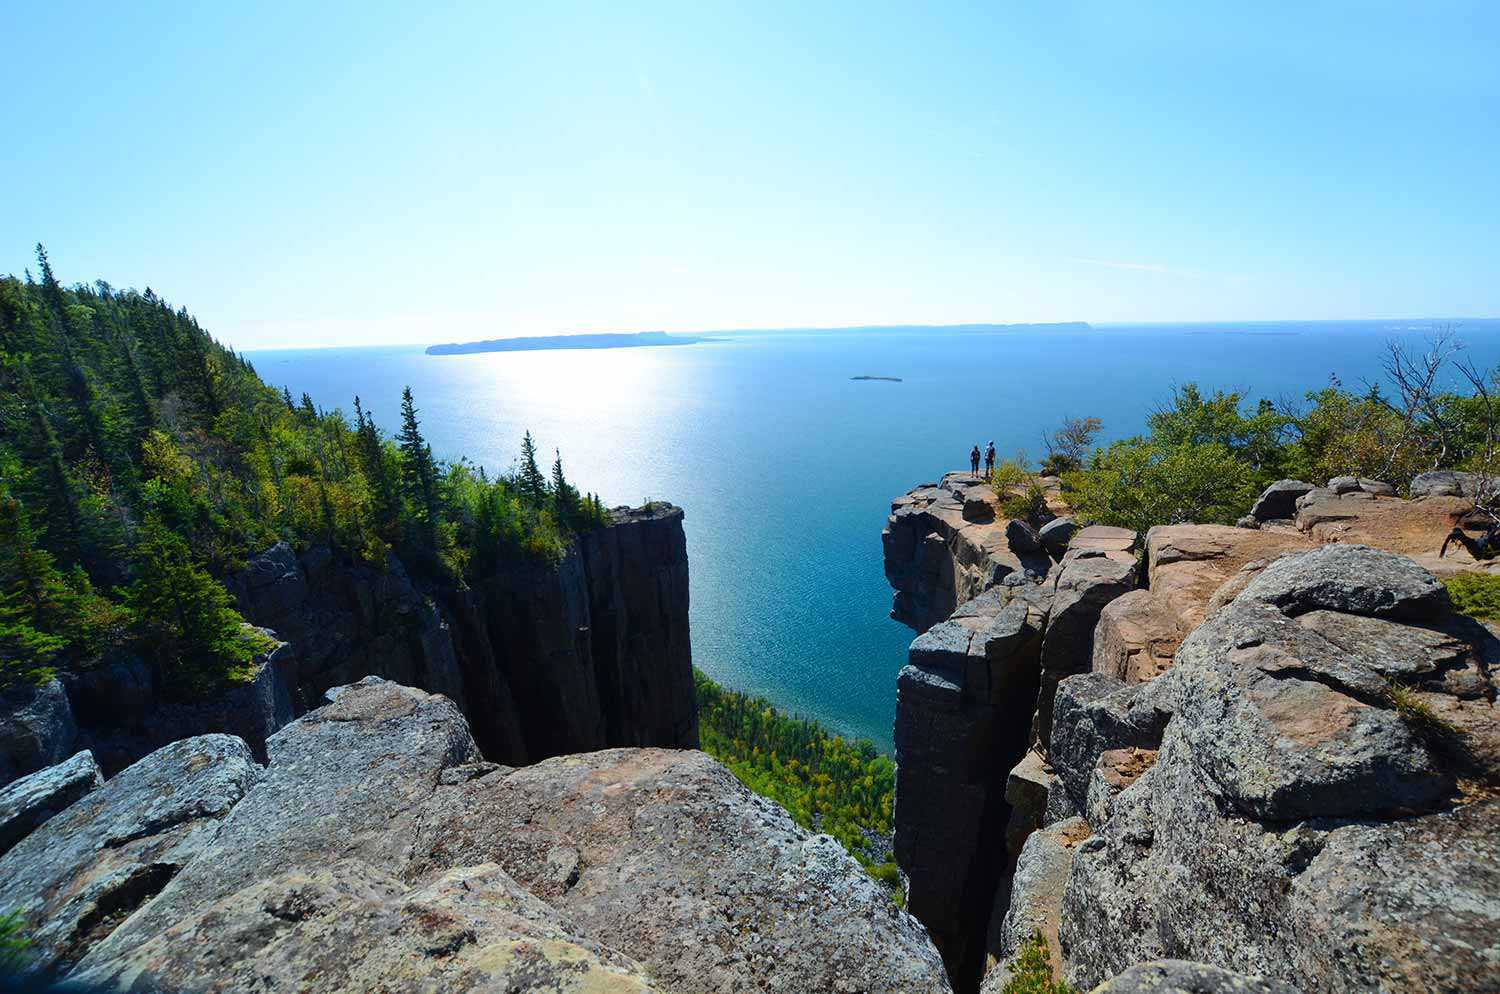 Spectacular views over Lake Superior from Sleeping Giant Provincial Park (Photo: Destination Ontario)